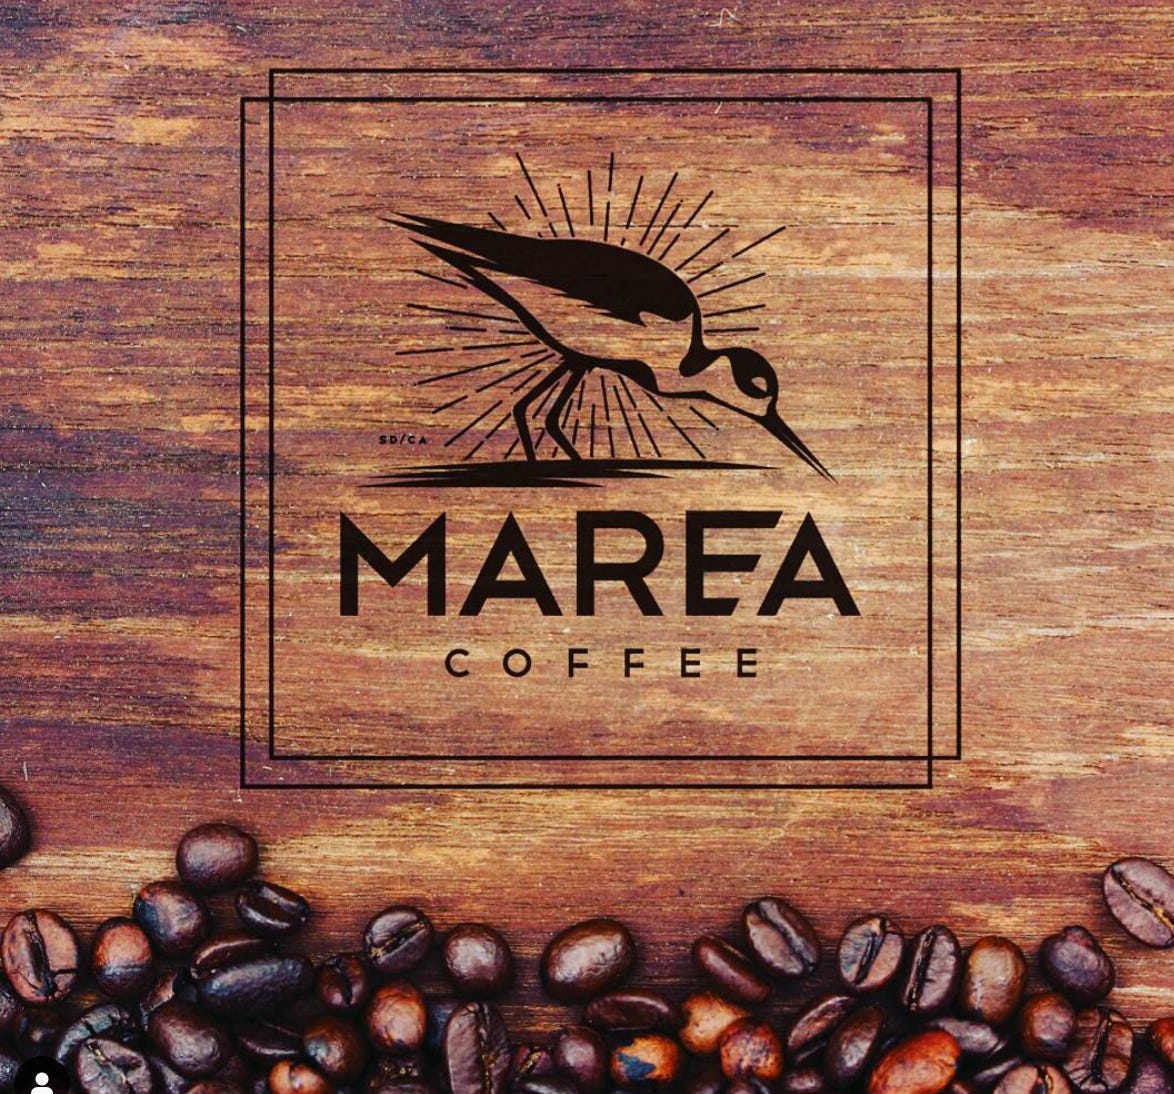 Marea Coffee logo of a bird superimposed over a piece of stained brown wood with coffee beans sprinkled along the bottom.